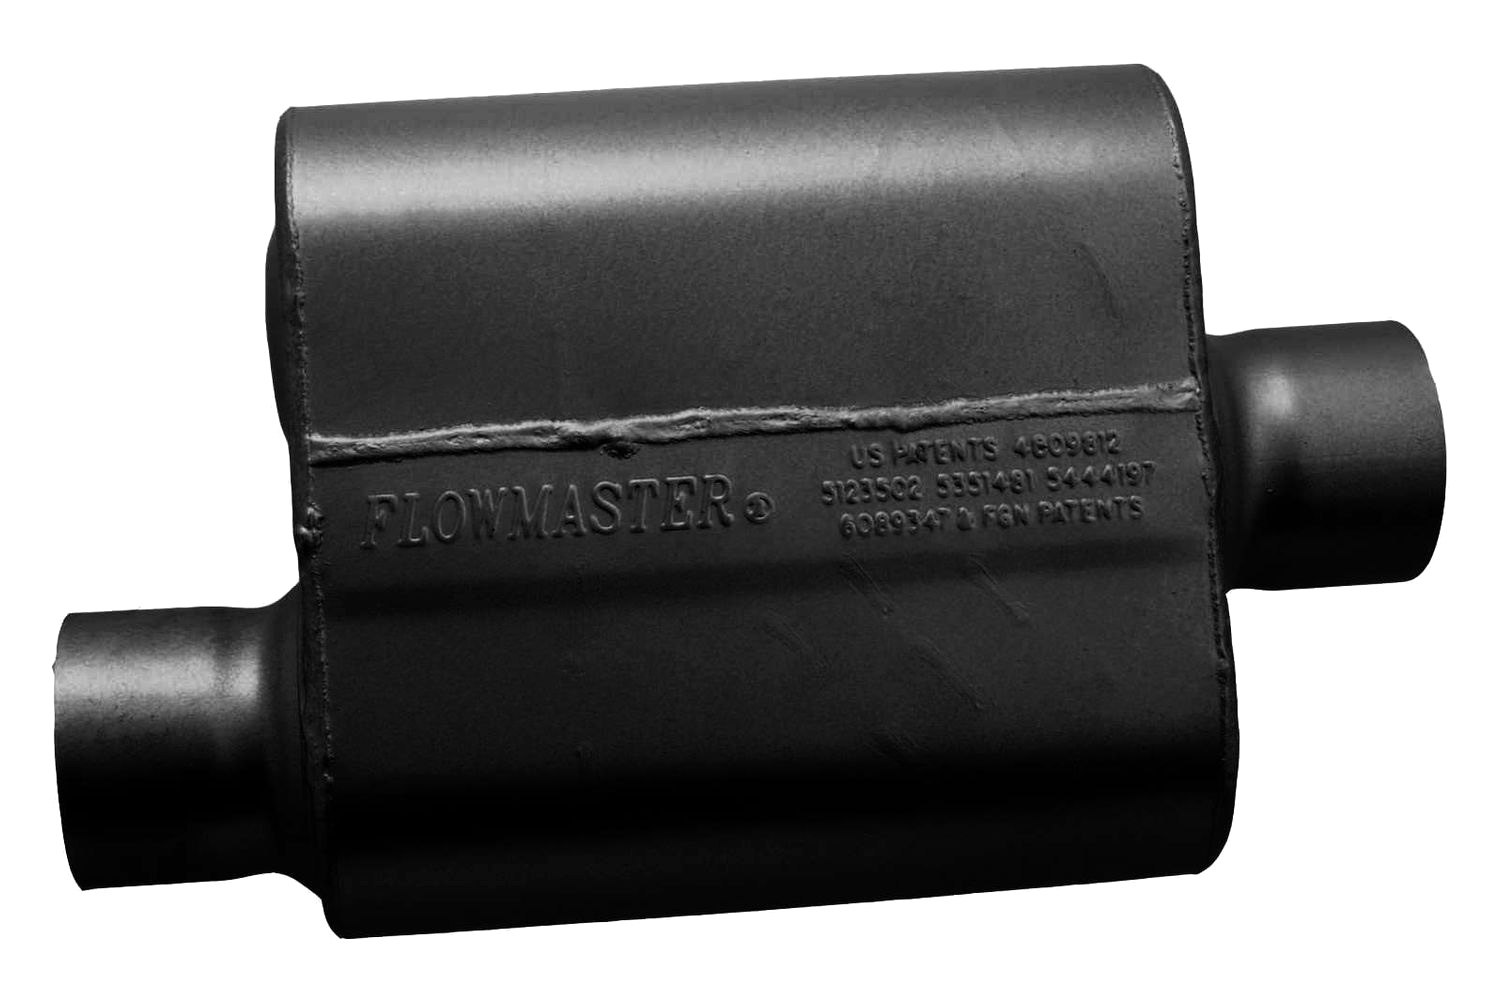 Single chamber flowmaster exhaust